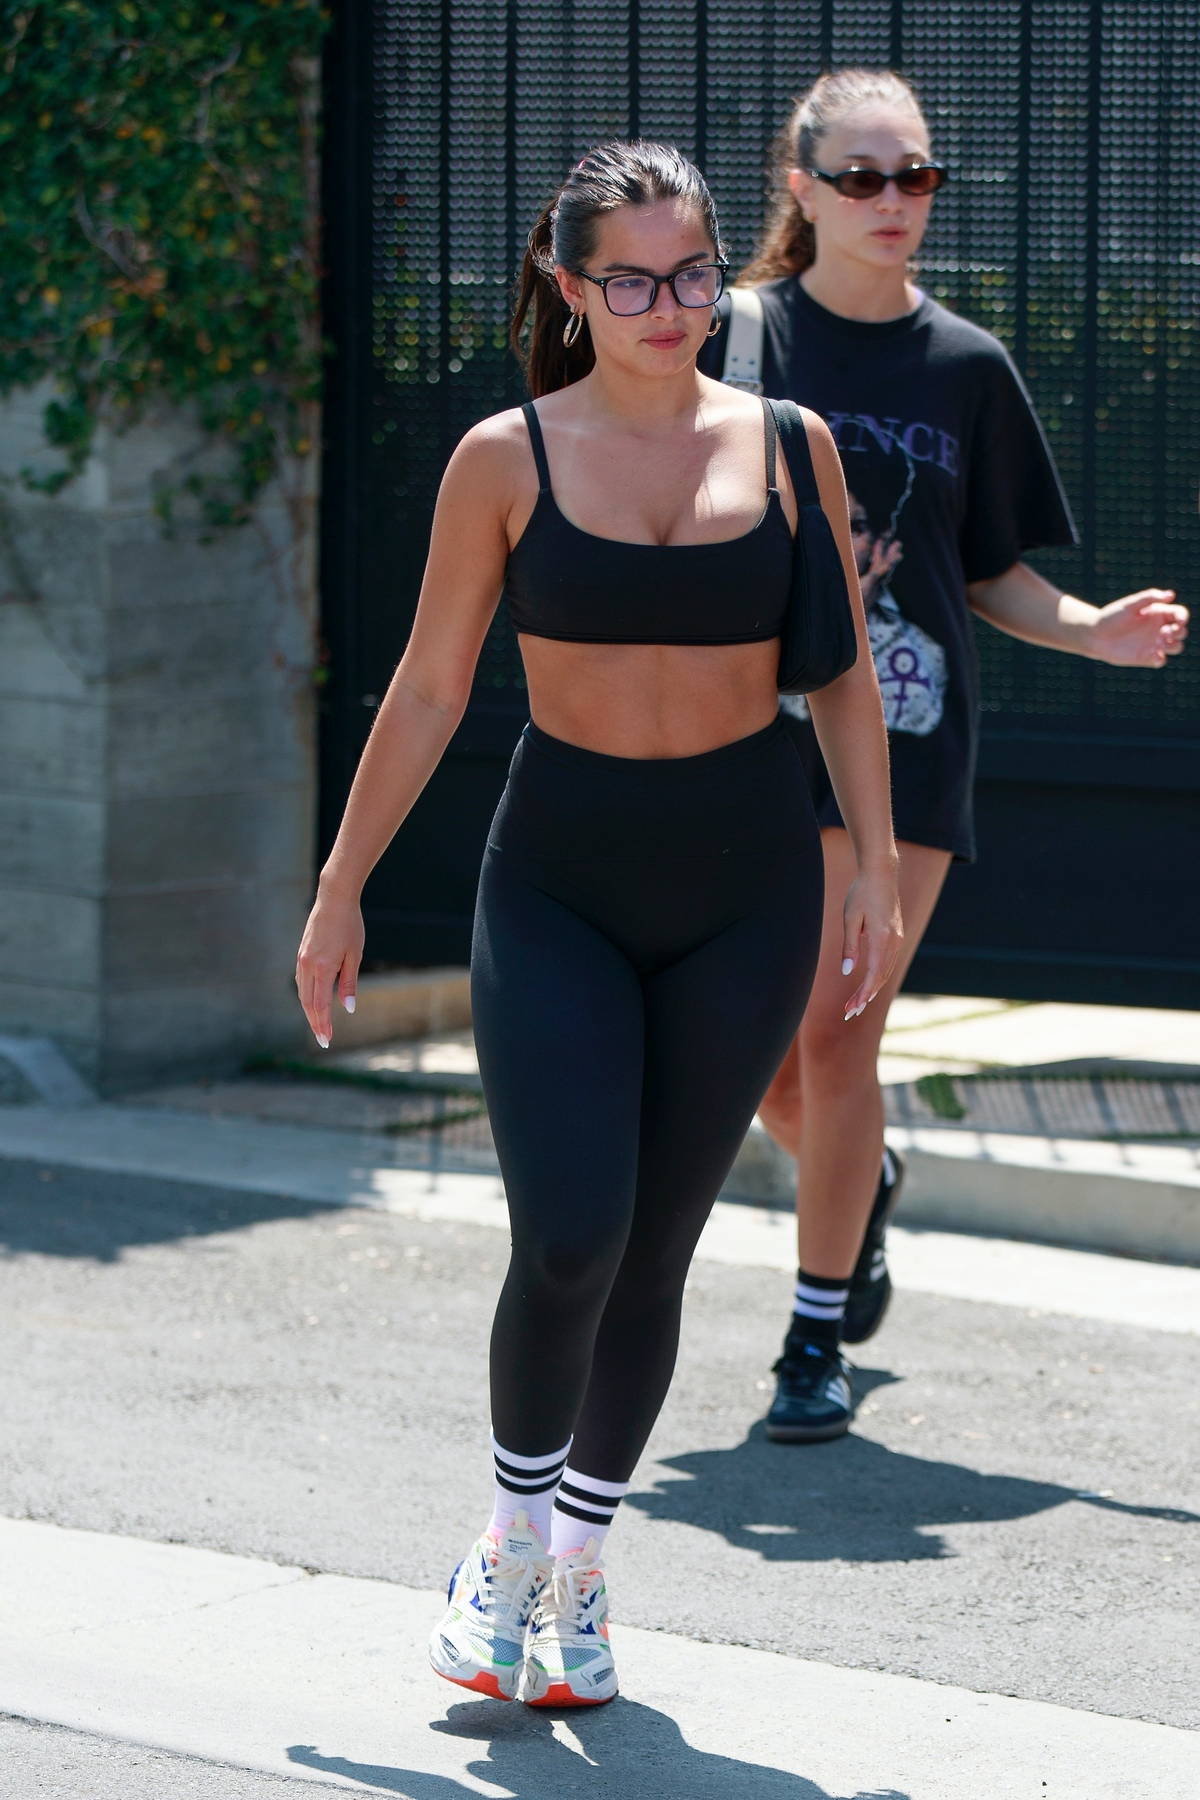 https://www.celebsfirst.com/wp-content/uploads/2022/07/addison-rae-looks-fit-in-a-black-sports-bra-and-leggings-while-leaving-her-pilates-class-in-west-hollywood-california-120722_2.jpg